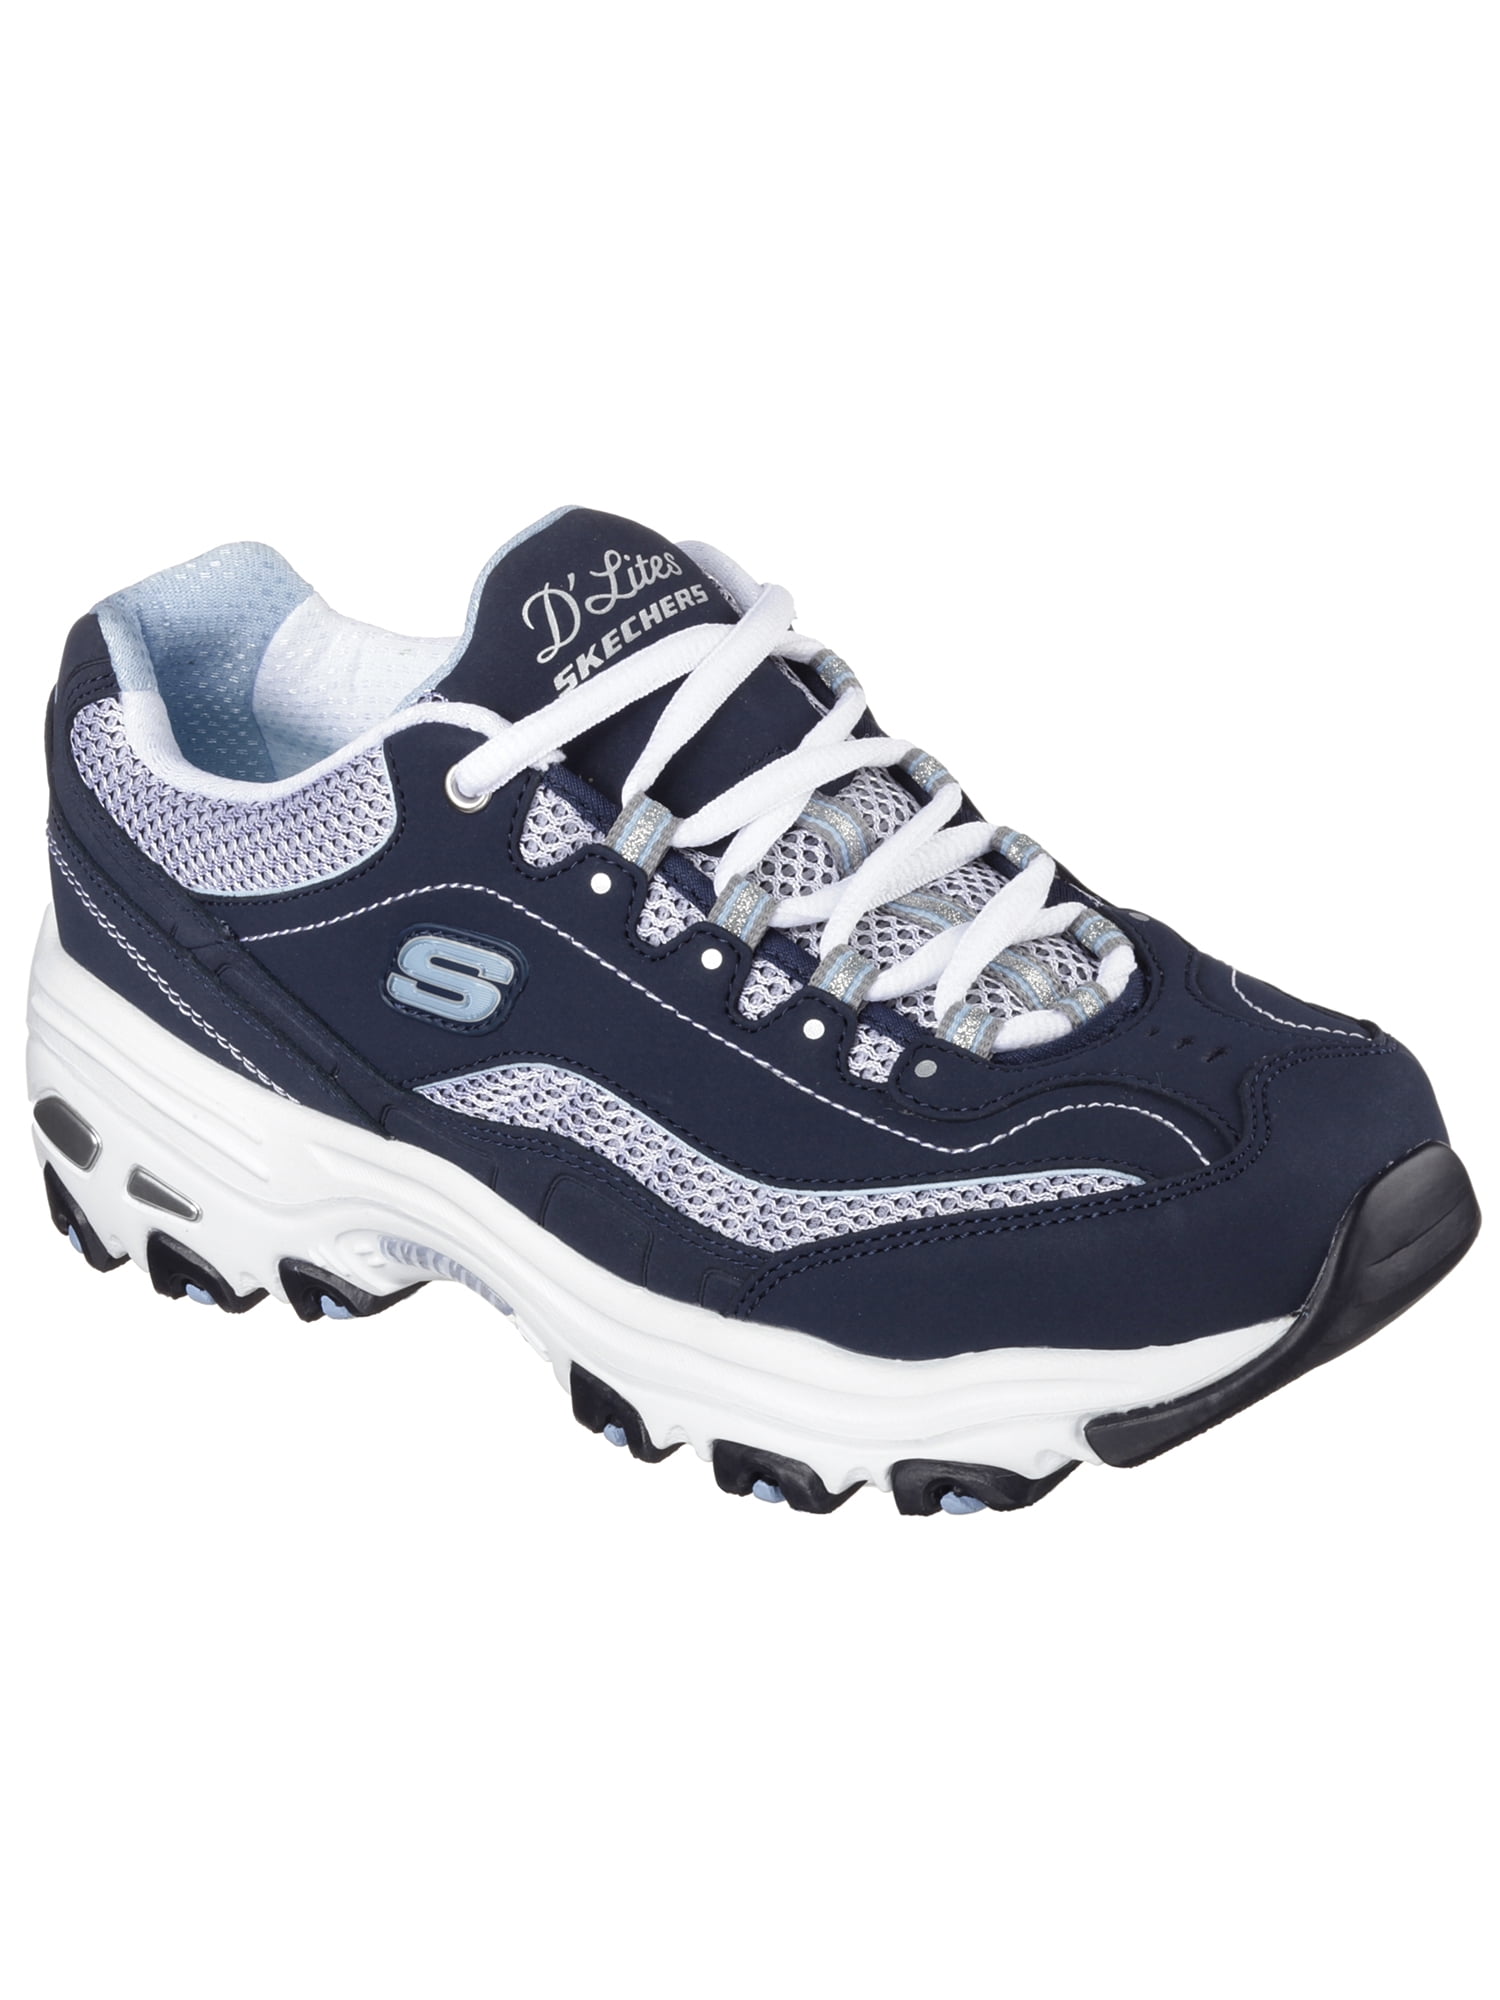 Womens Skechers in Extra Wide – Wide Fit Shoes US